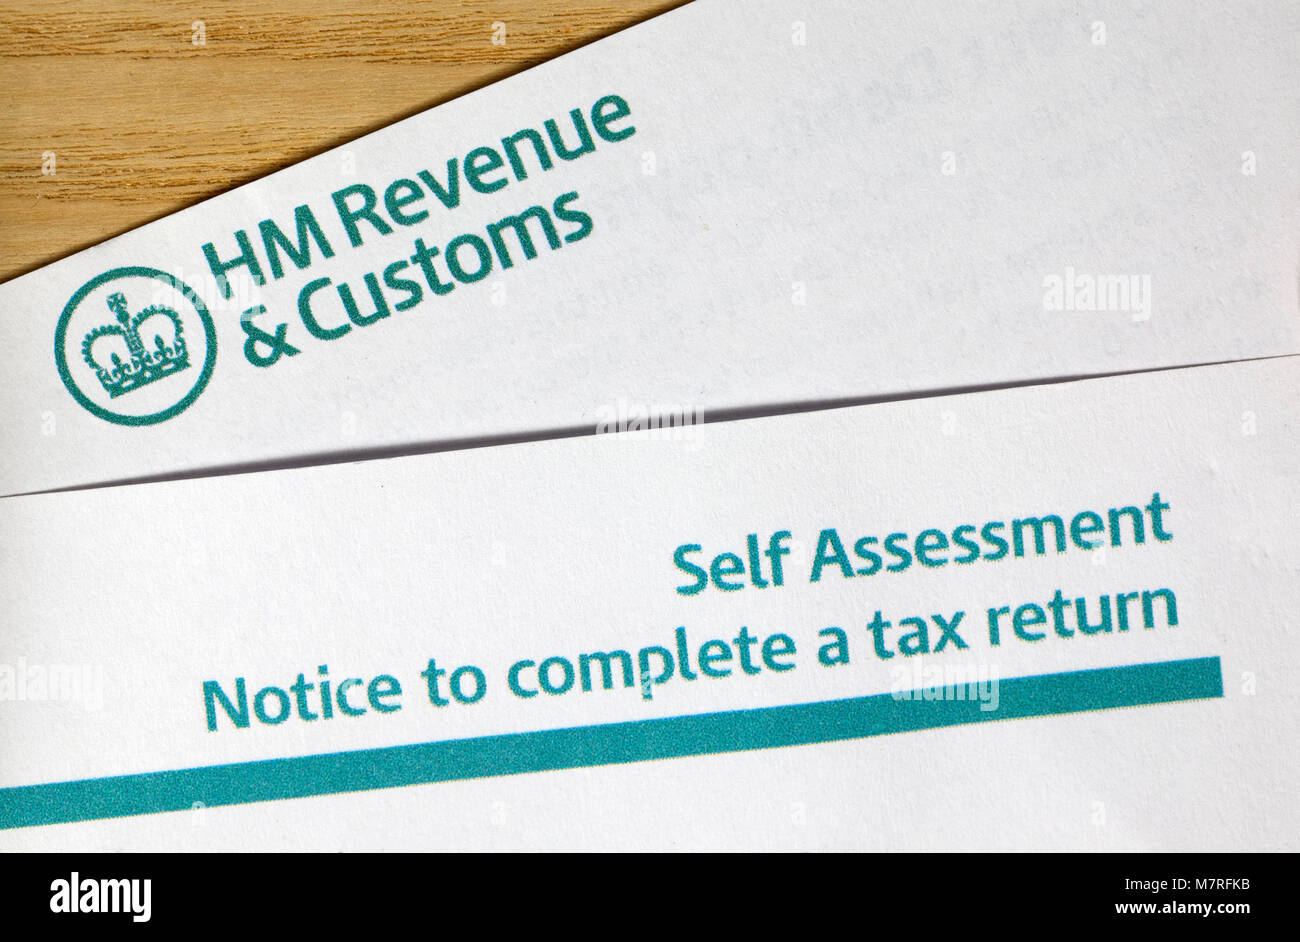 Self assessment notice to complete a tax return Stock Photo